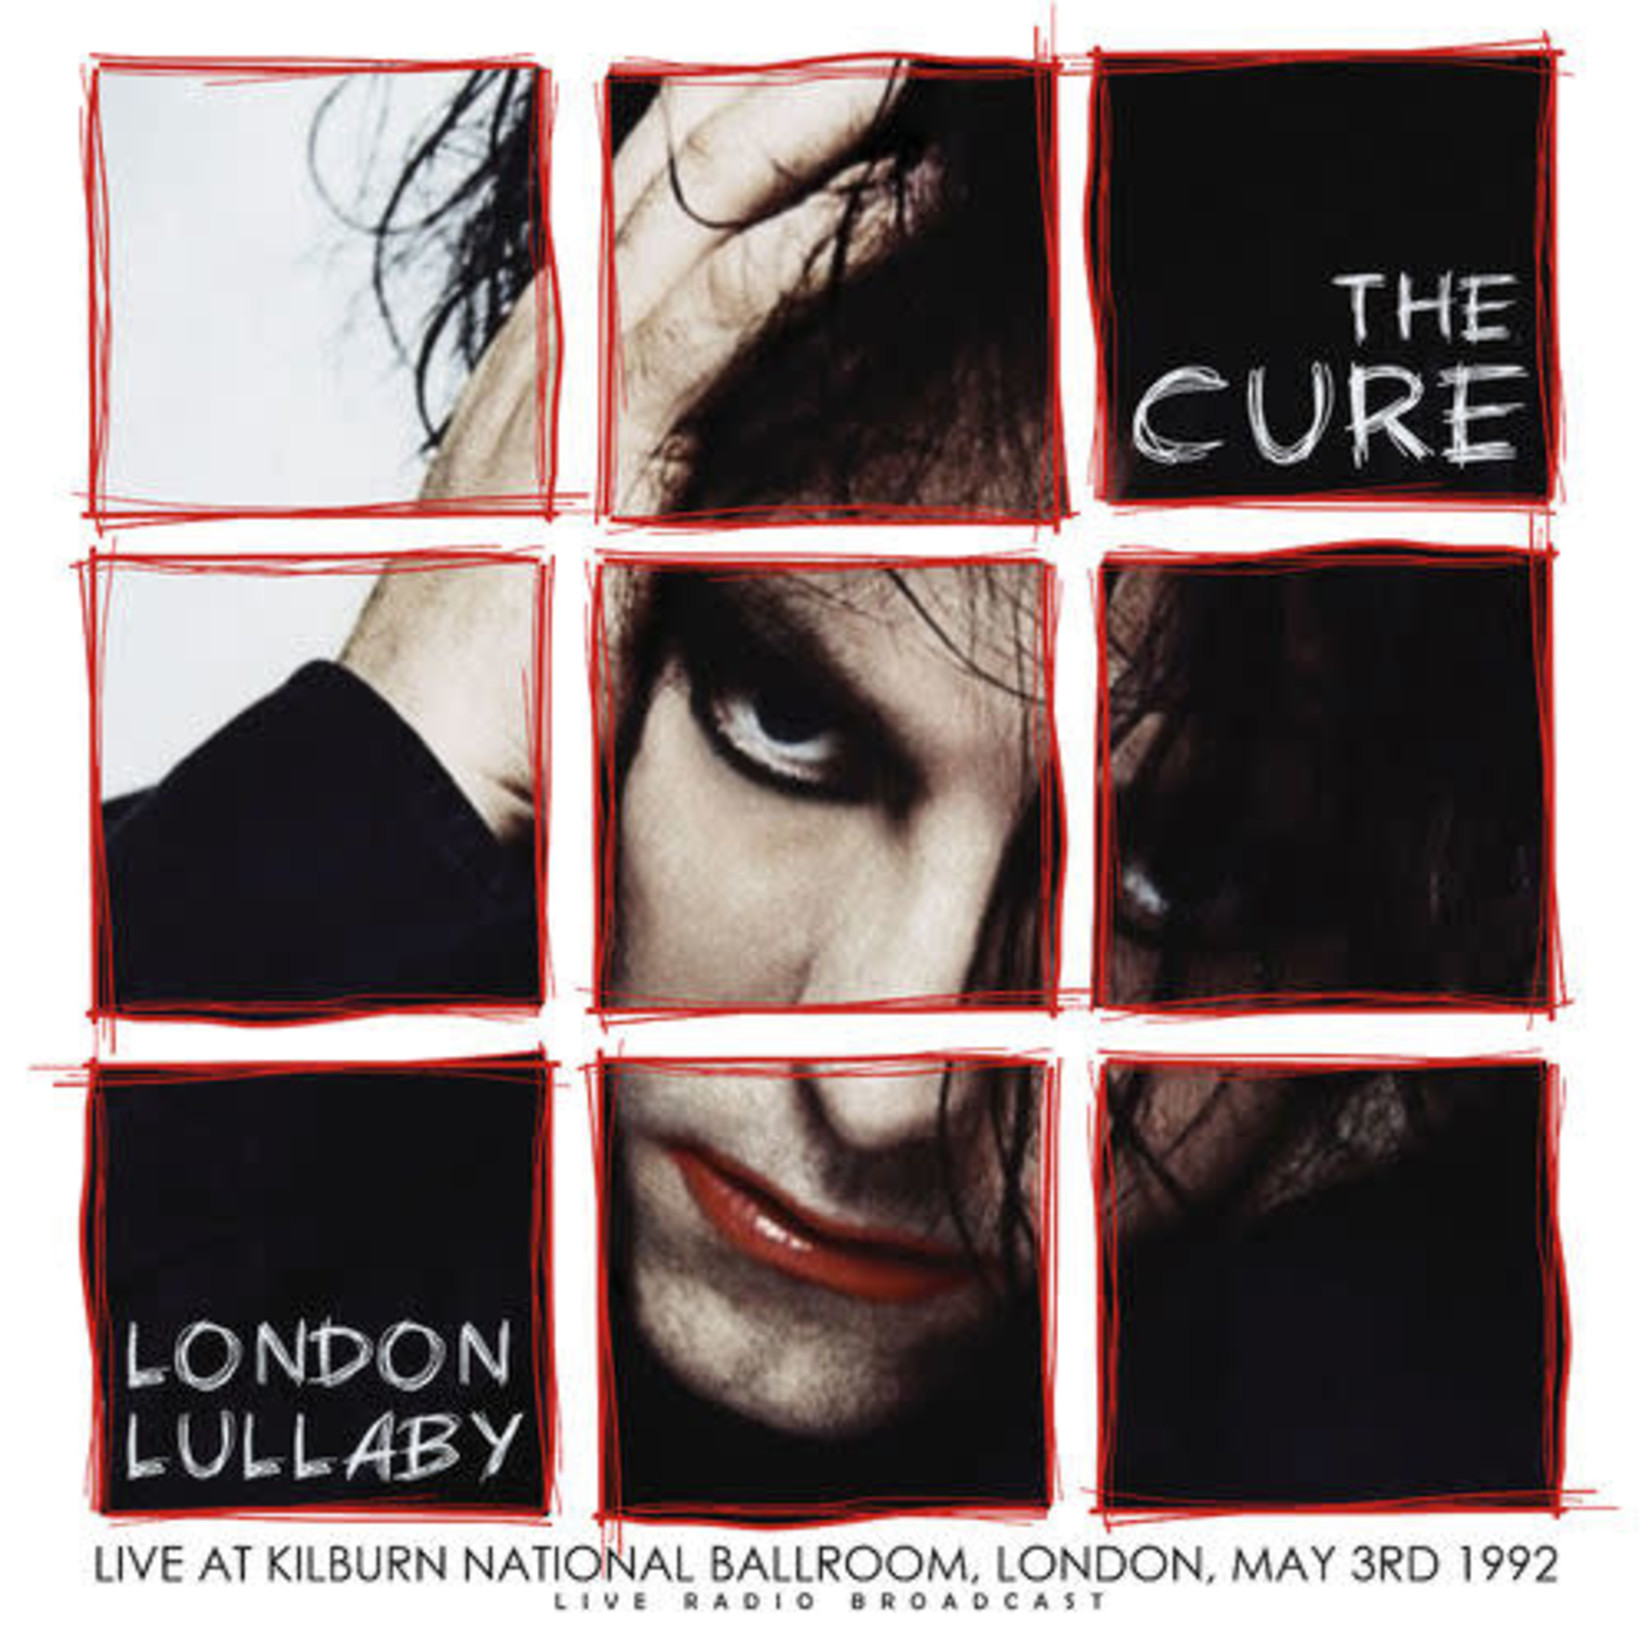 [New] Cure: London Lullaby [CULT LEGENDS]